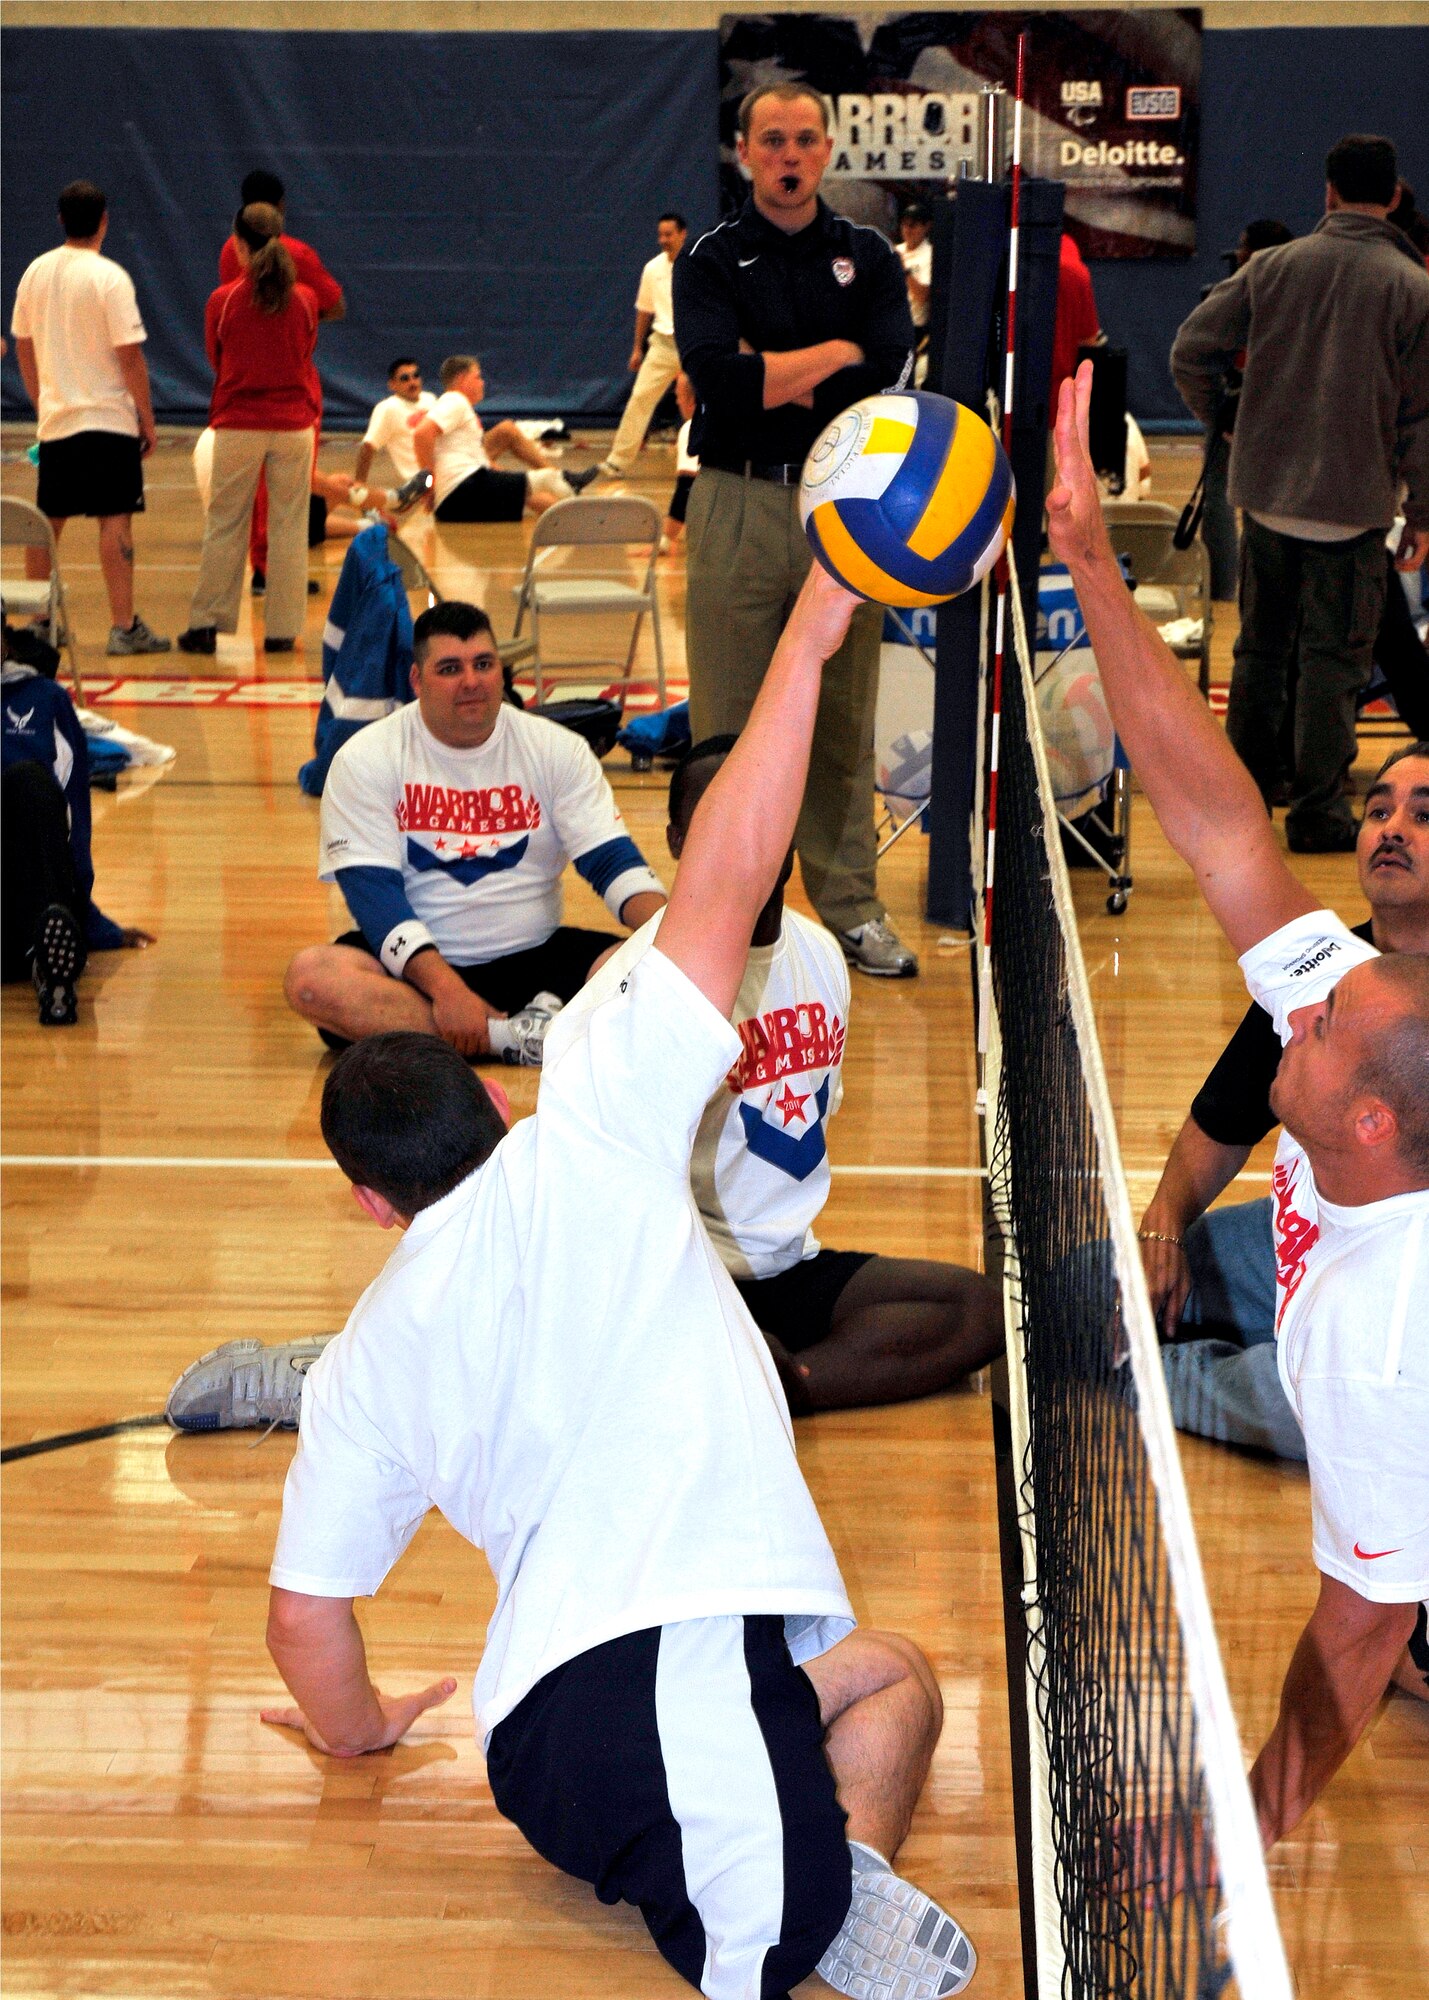 Matthew Pirrello, an Ohio University ROTC Cadet, (foreground) attempts to block Team Army’s spiked ball during a civic leader orientation during the 2011 Warrior Games training week in Colorado Springs. (U.S. Air Force Photo by Lt.Col. Richard Williamson.)